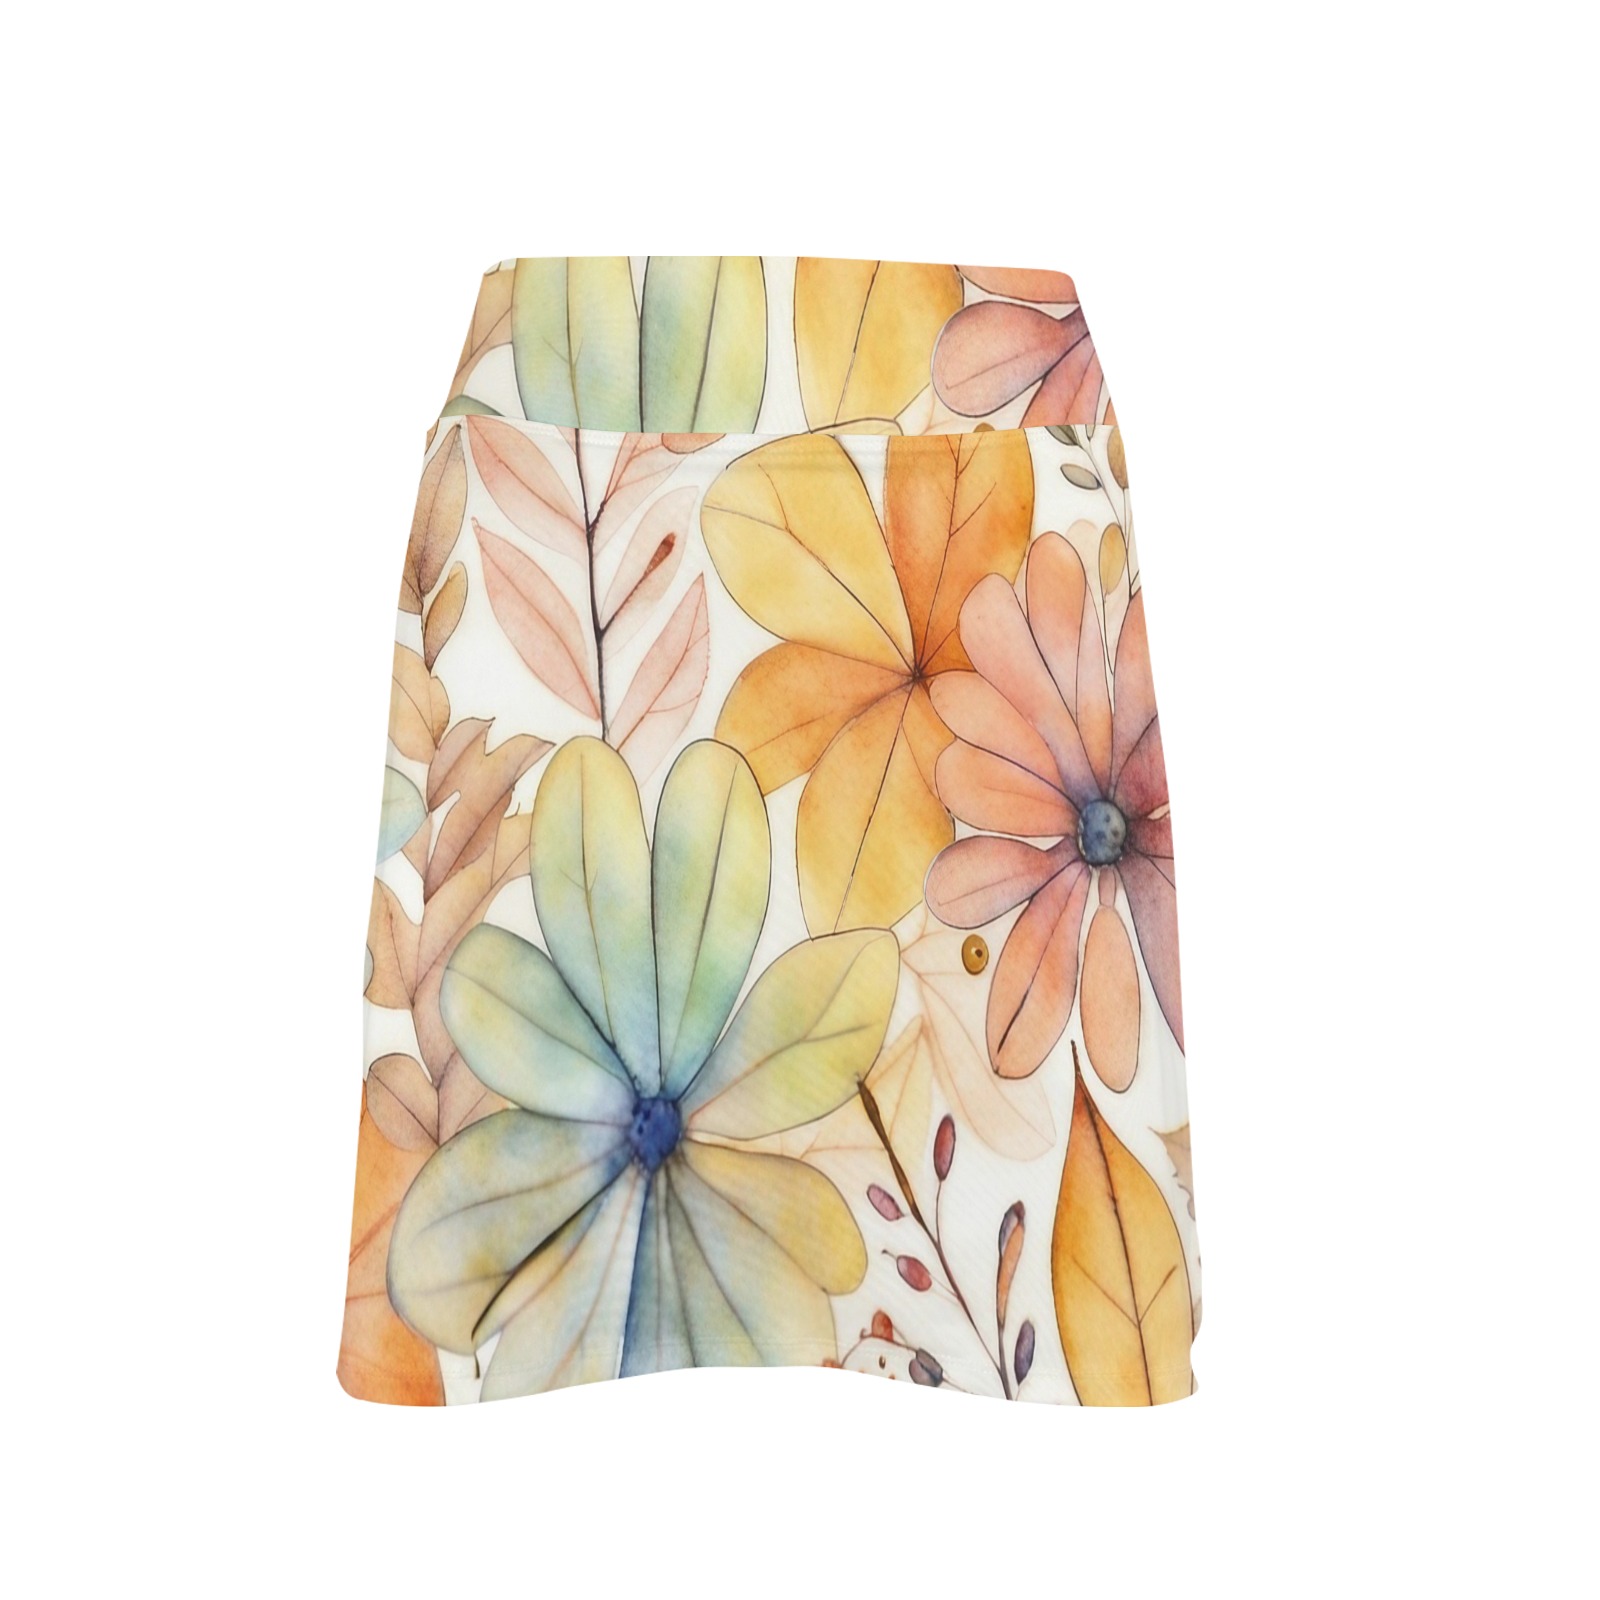 Watercolor Floral 2 Women's Golf Skirt with Pockets (Model D64)